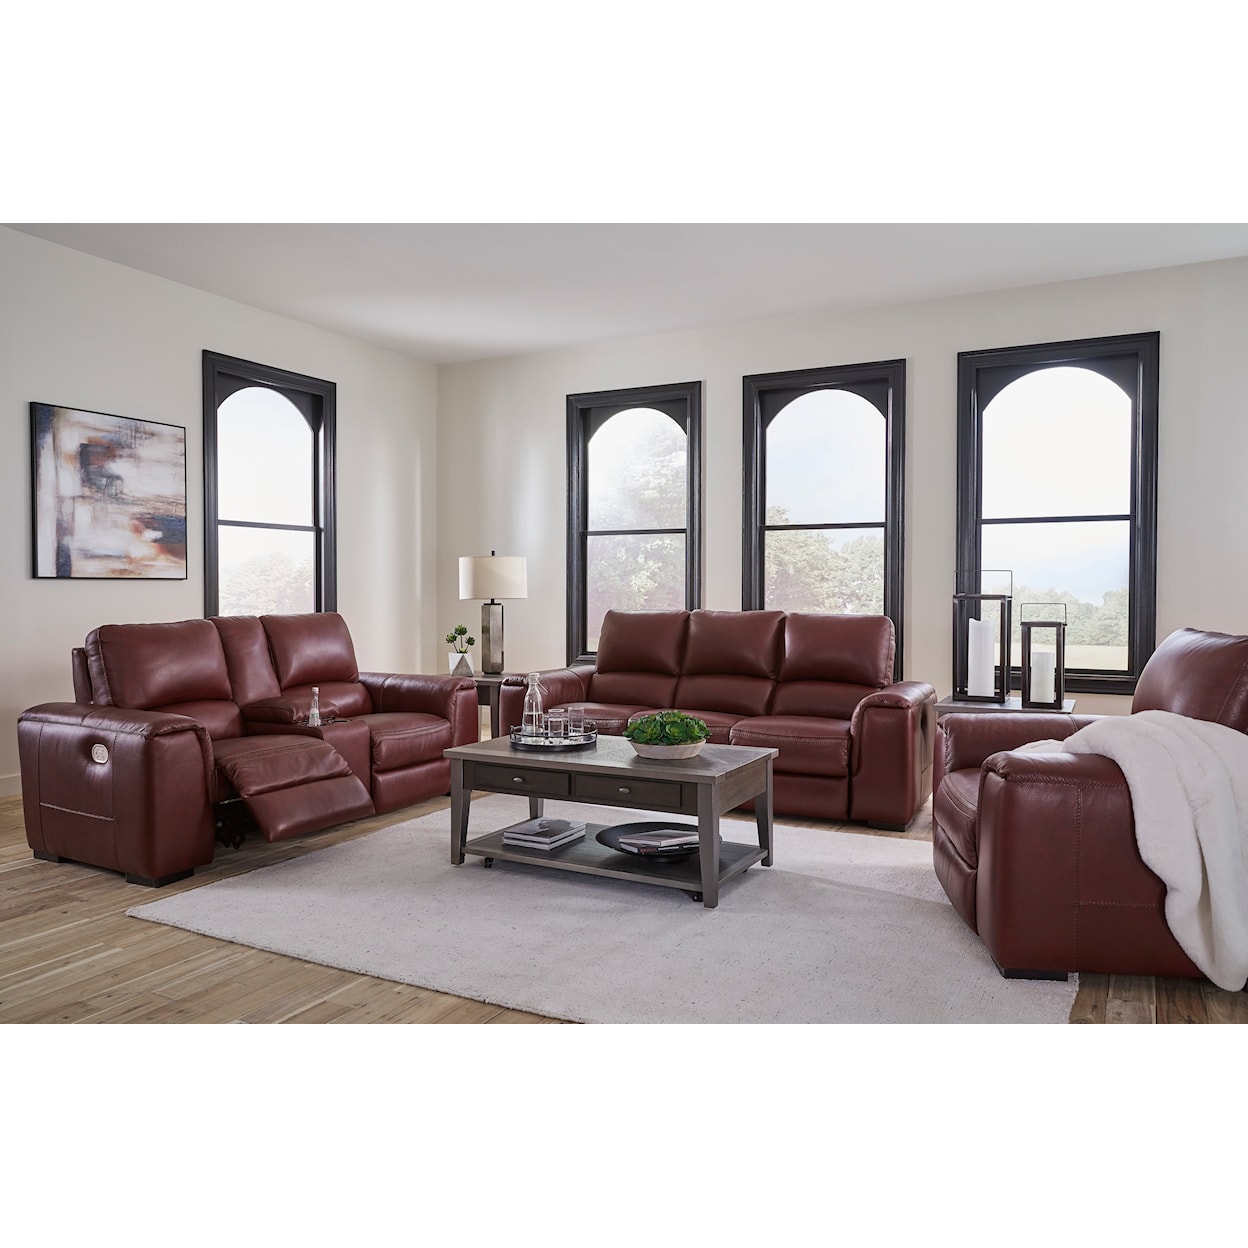 Signature Design by Ashley Alessandro Living Room Set